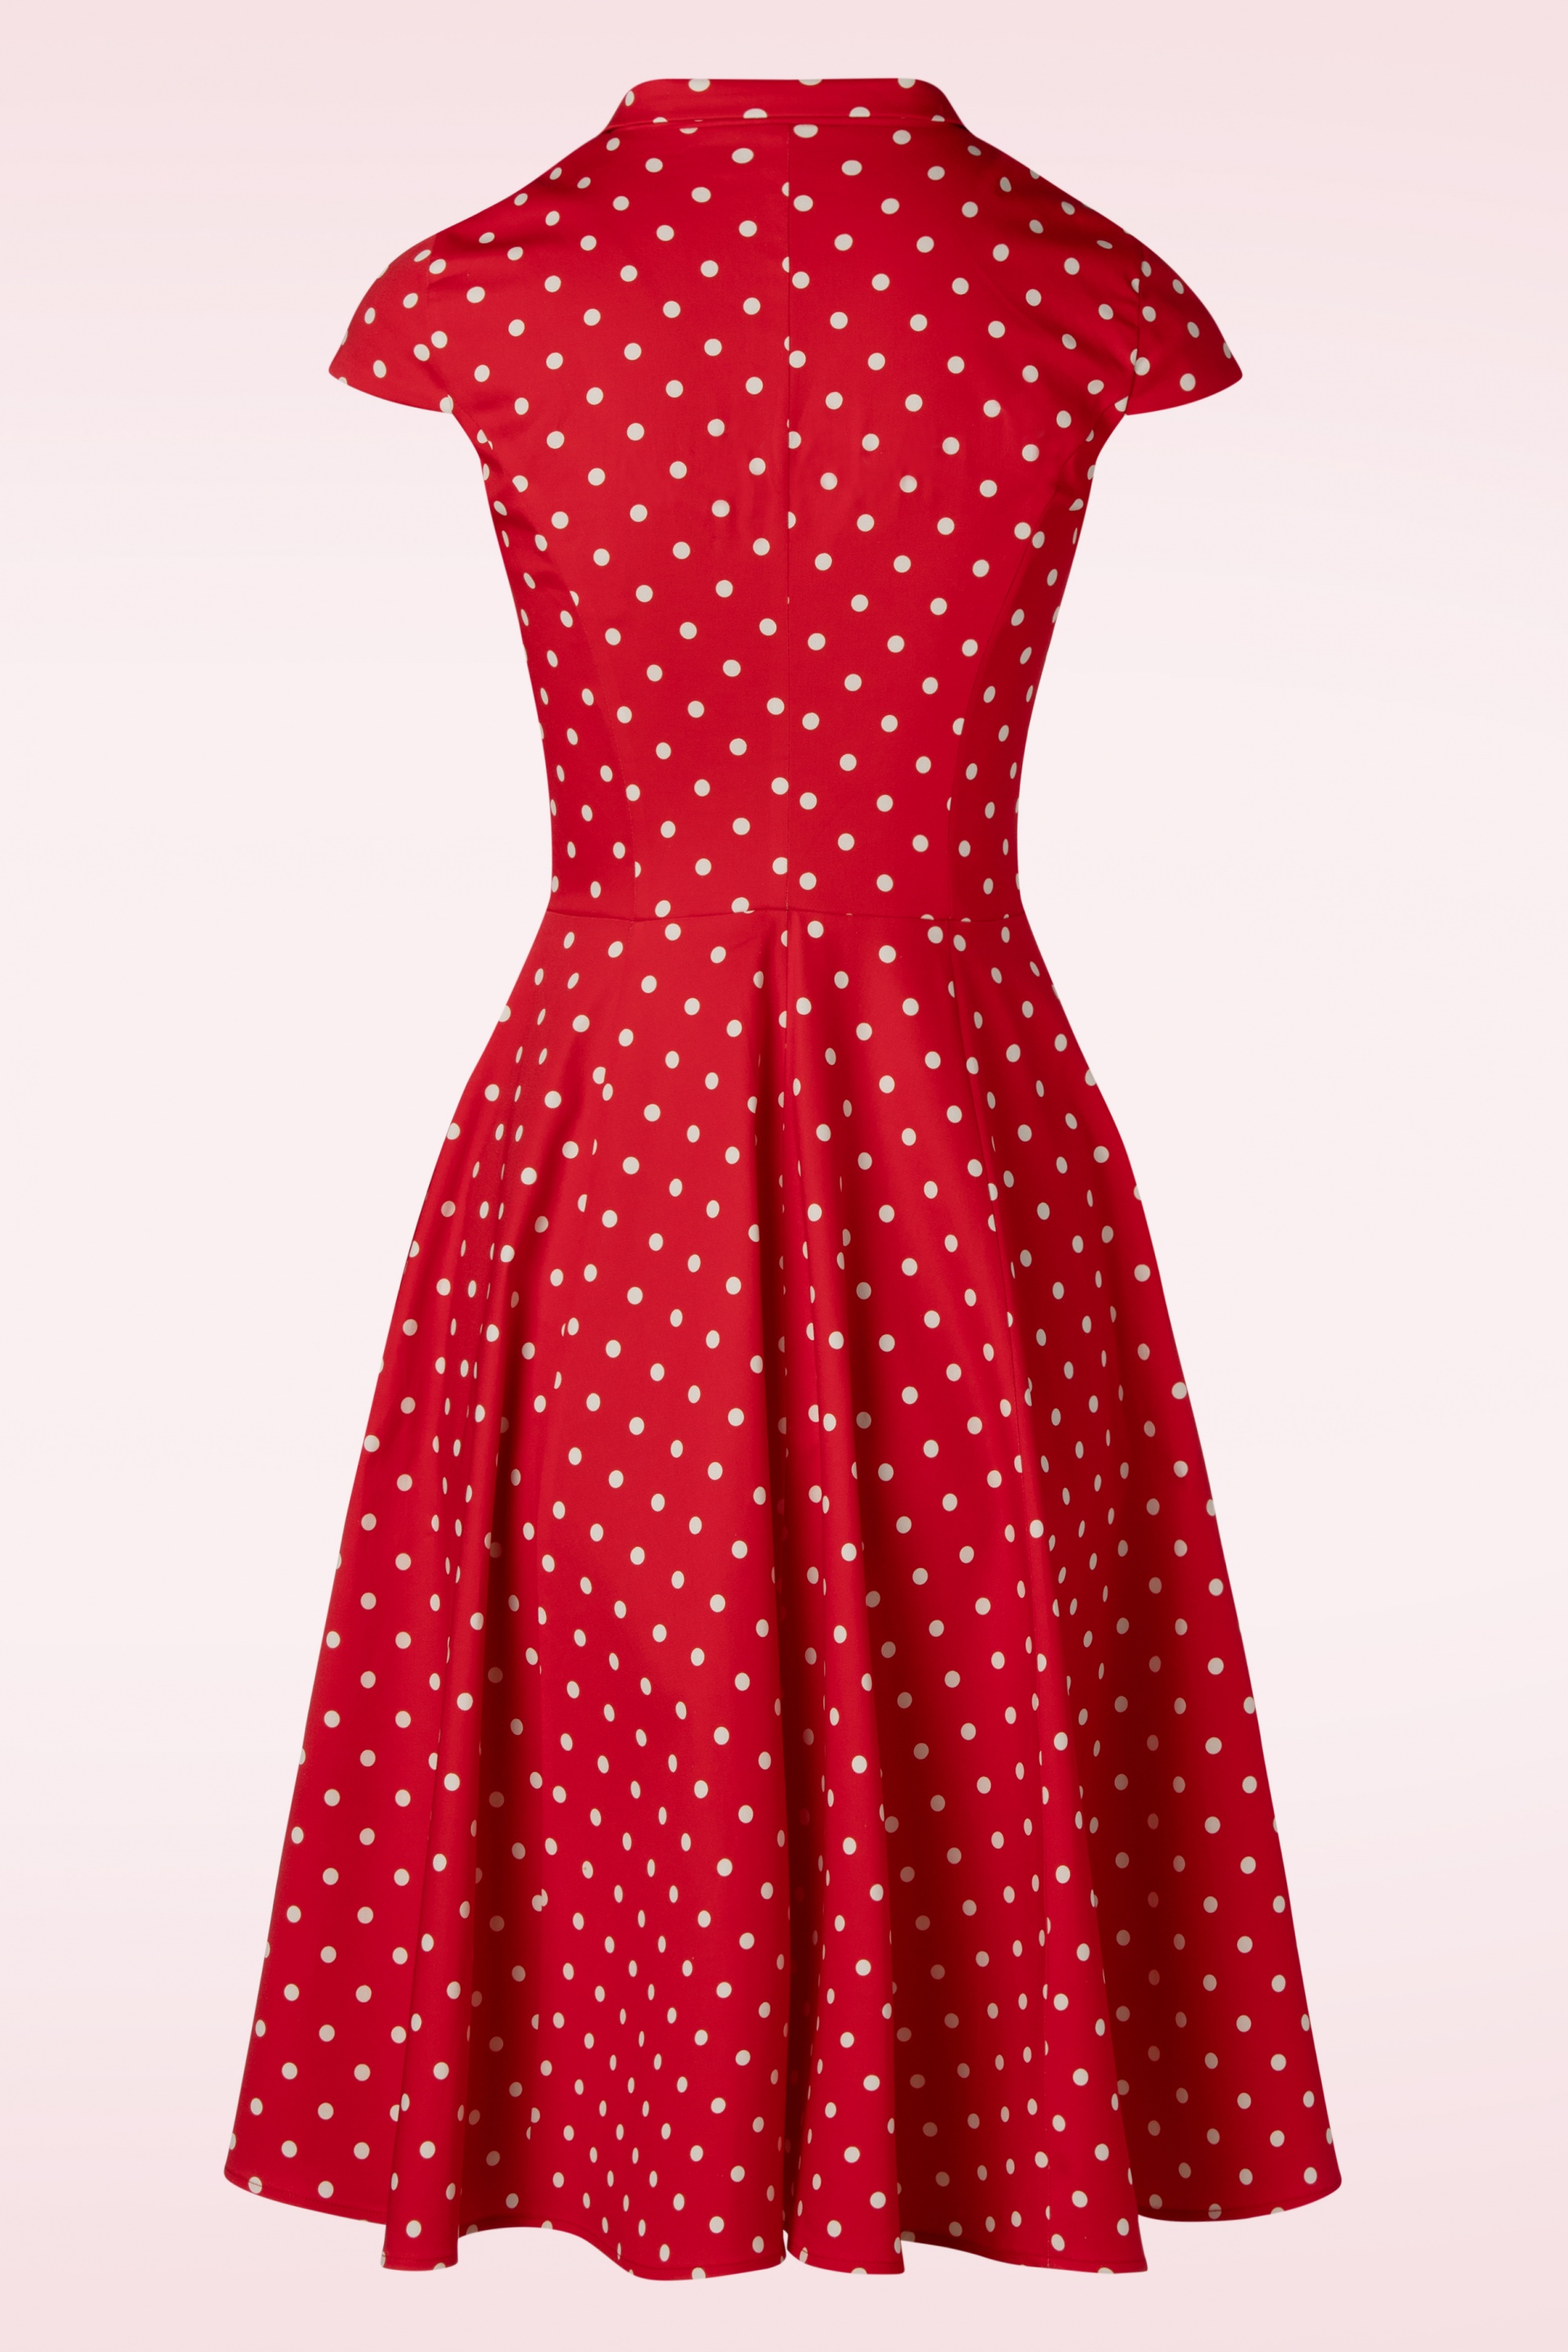 Topvintage Boutique Collection - Exclusief TopVintage ~ Angie Polkadot Swing jurk in rood 7